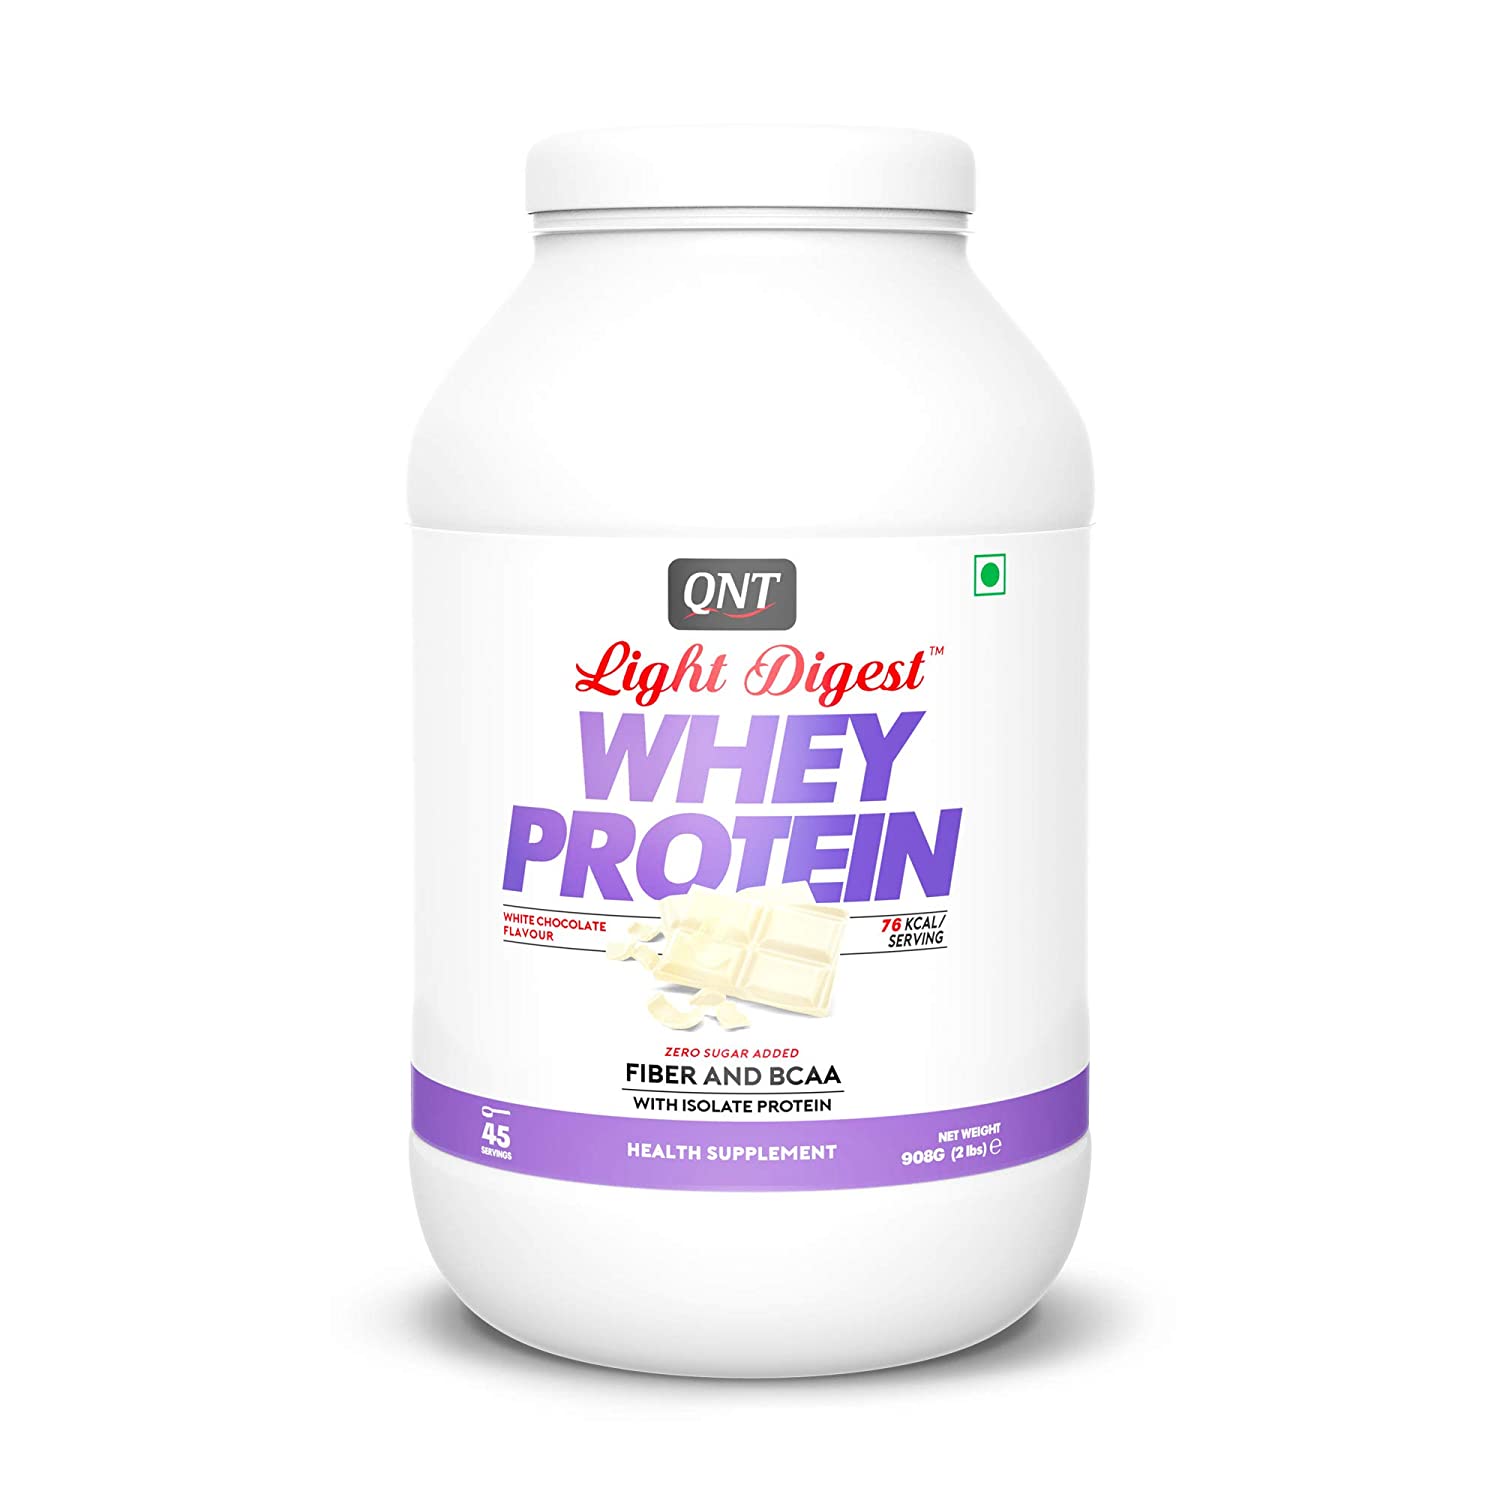 QNT Light Digest Whey Protein White Chocolate Flavour Powder, 908 gm, Pack of 1 